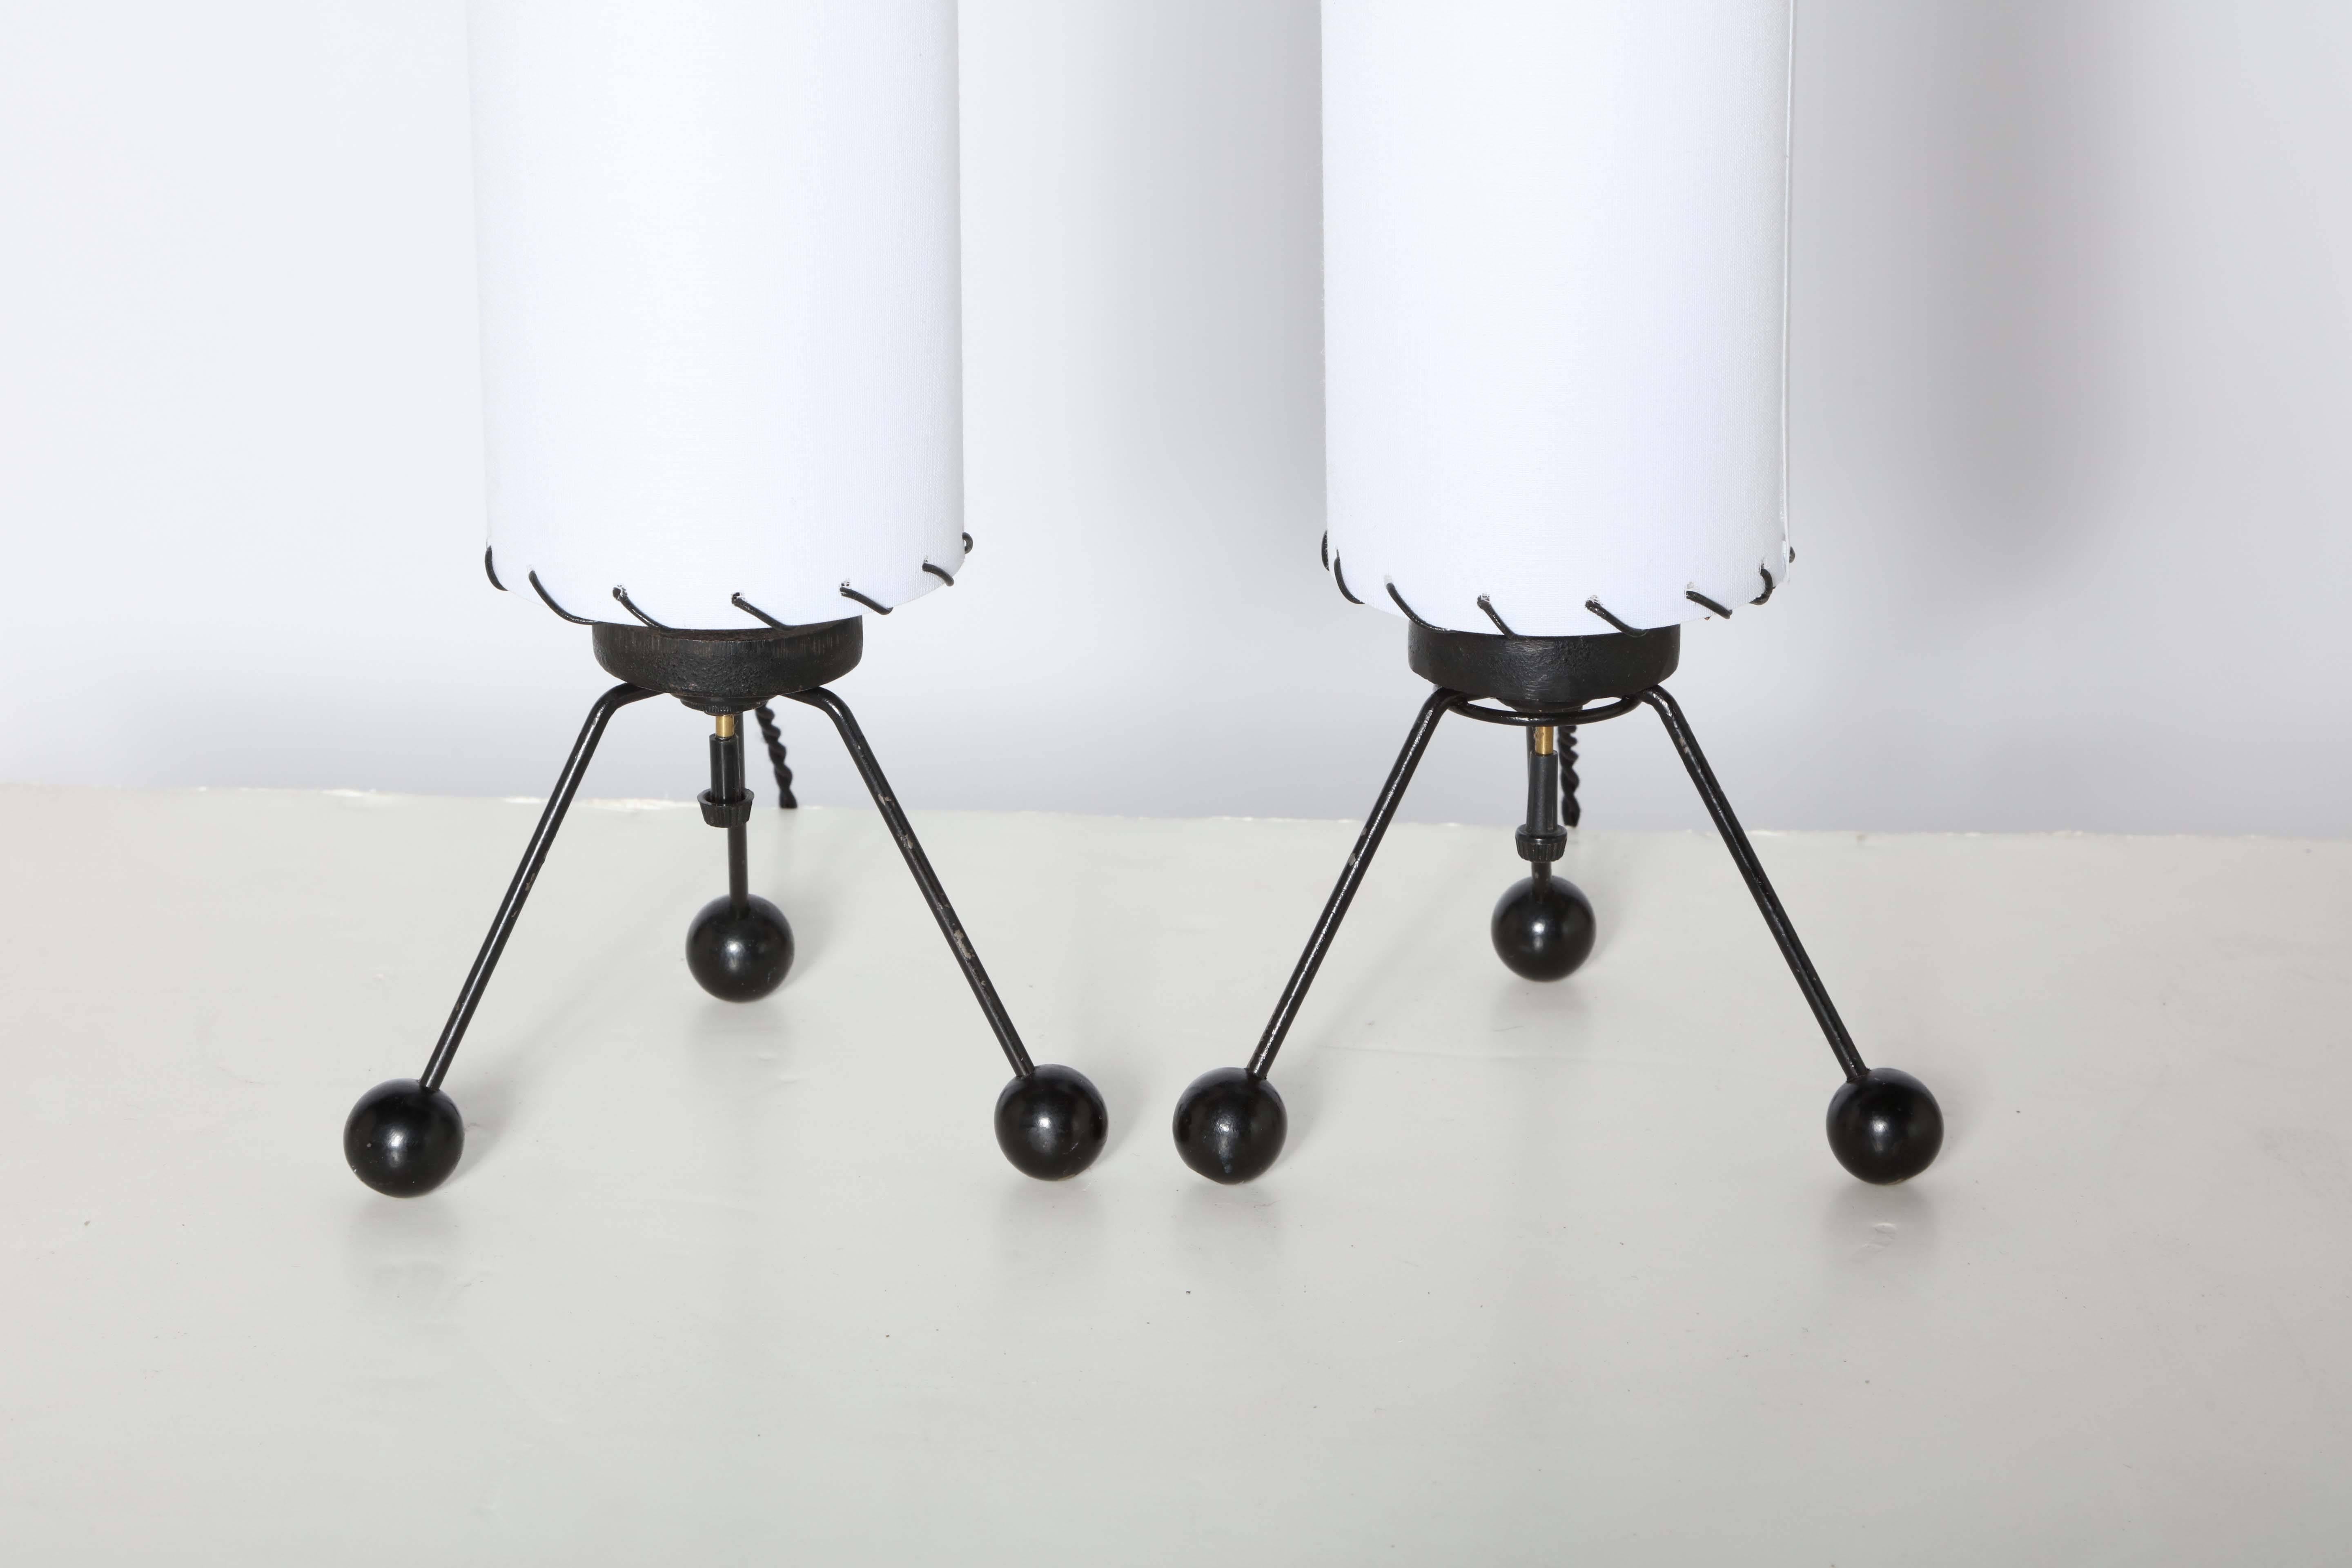 Enameled Small Pair of Verplex Co. Black Tripod Table Lamps with White Linen Shades, 1950 For Sale